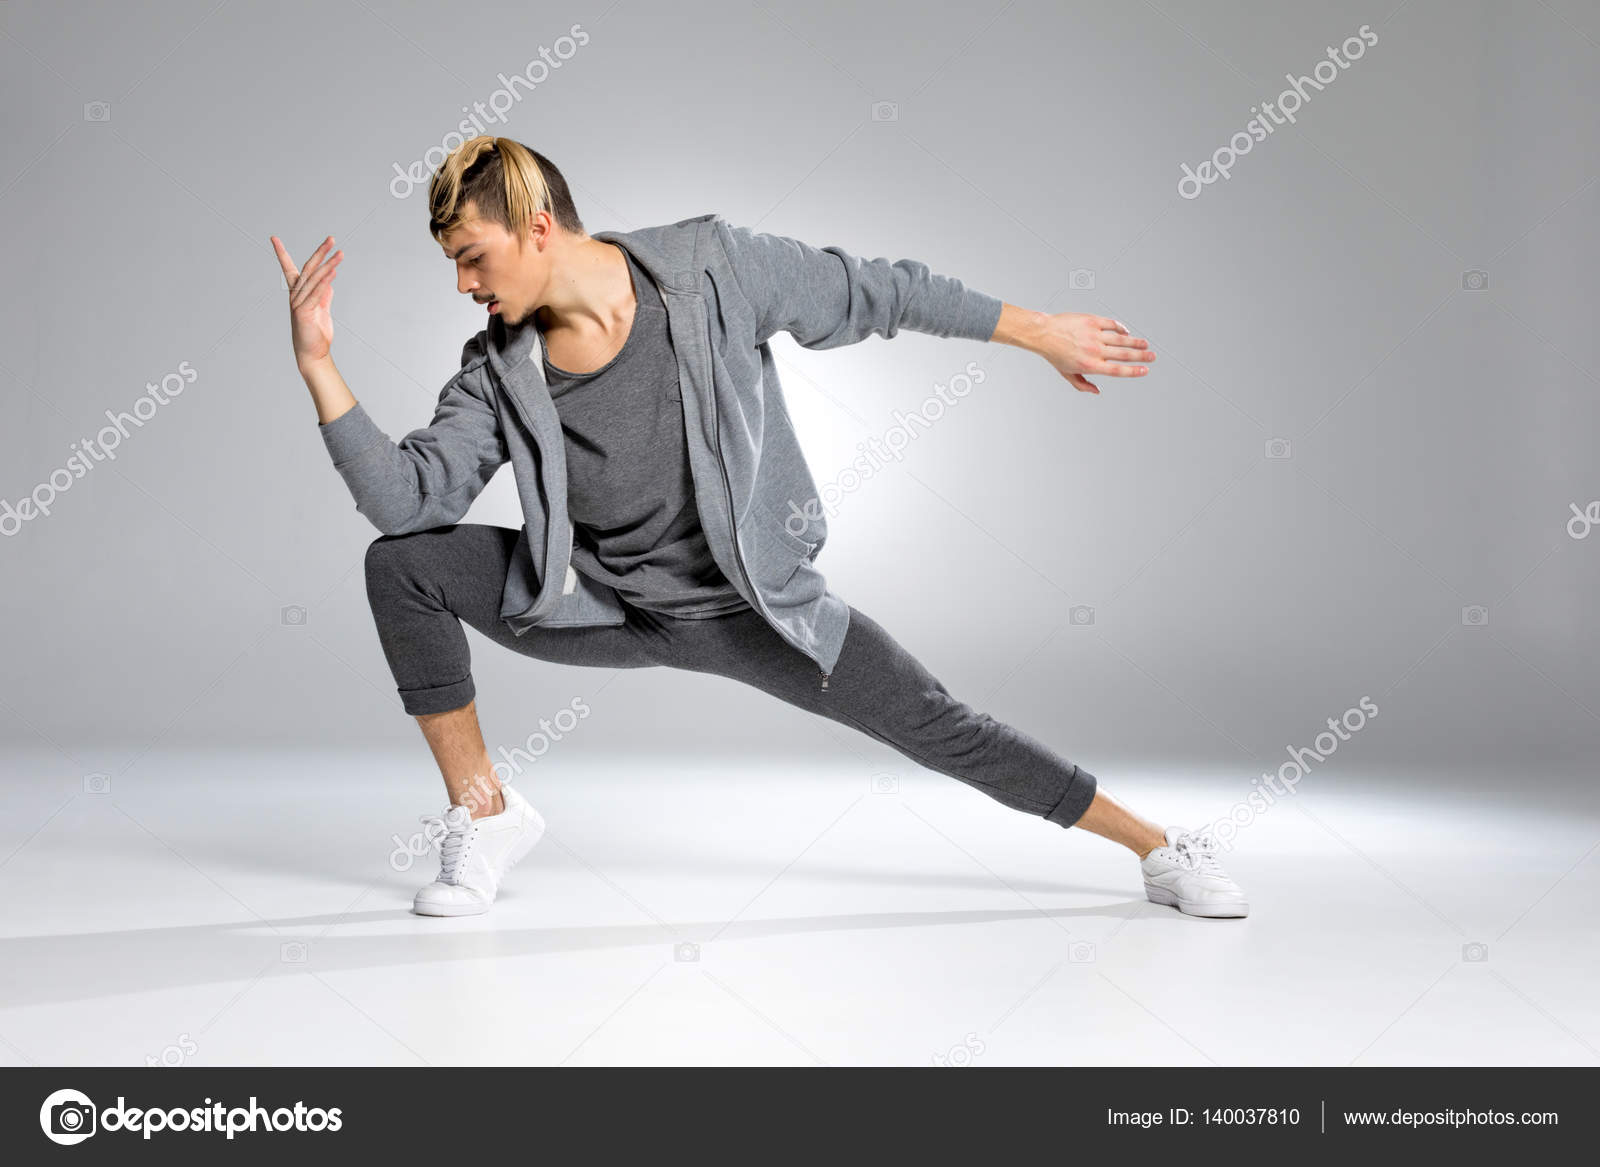 Black Man Performing Hip Hop Dance Choreography Stock Image - Image of  movement, excited: 54463171